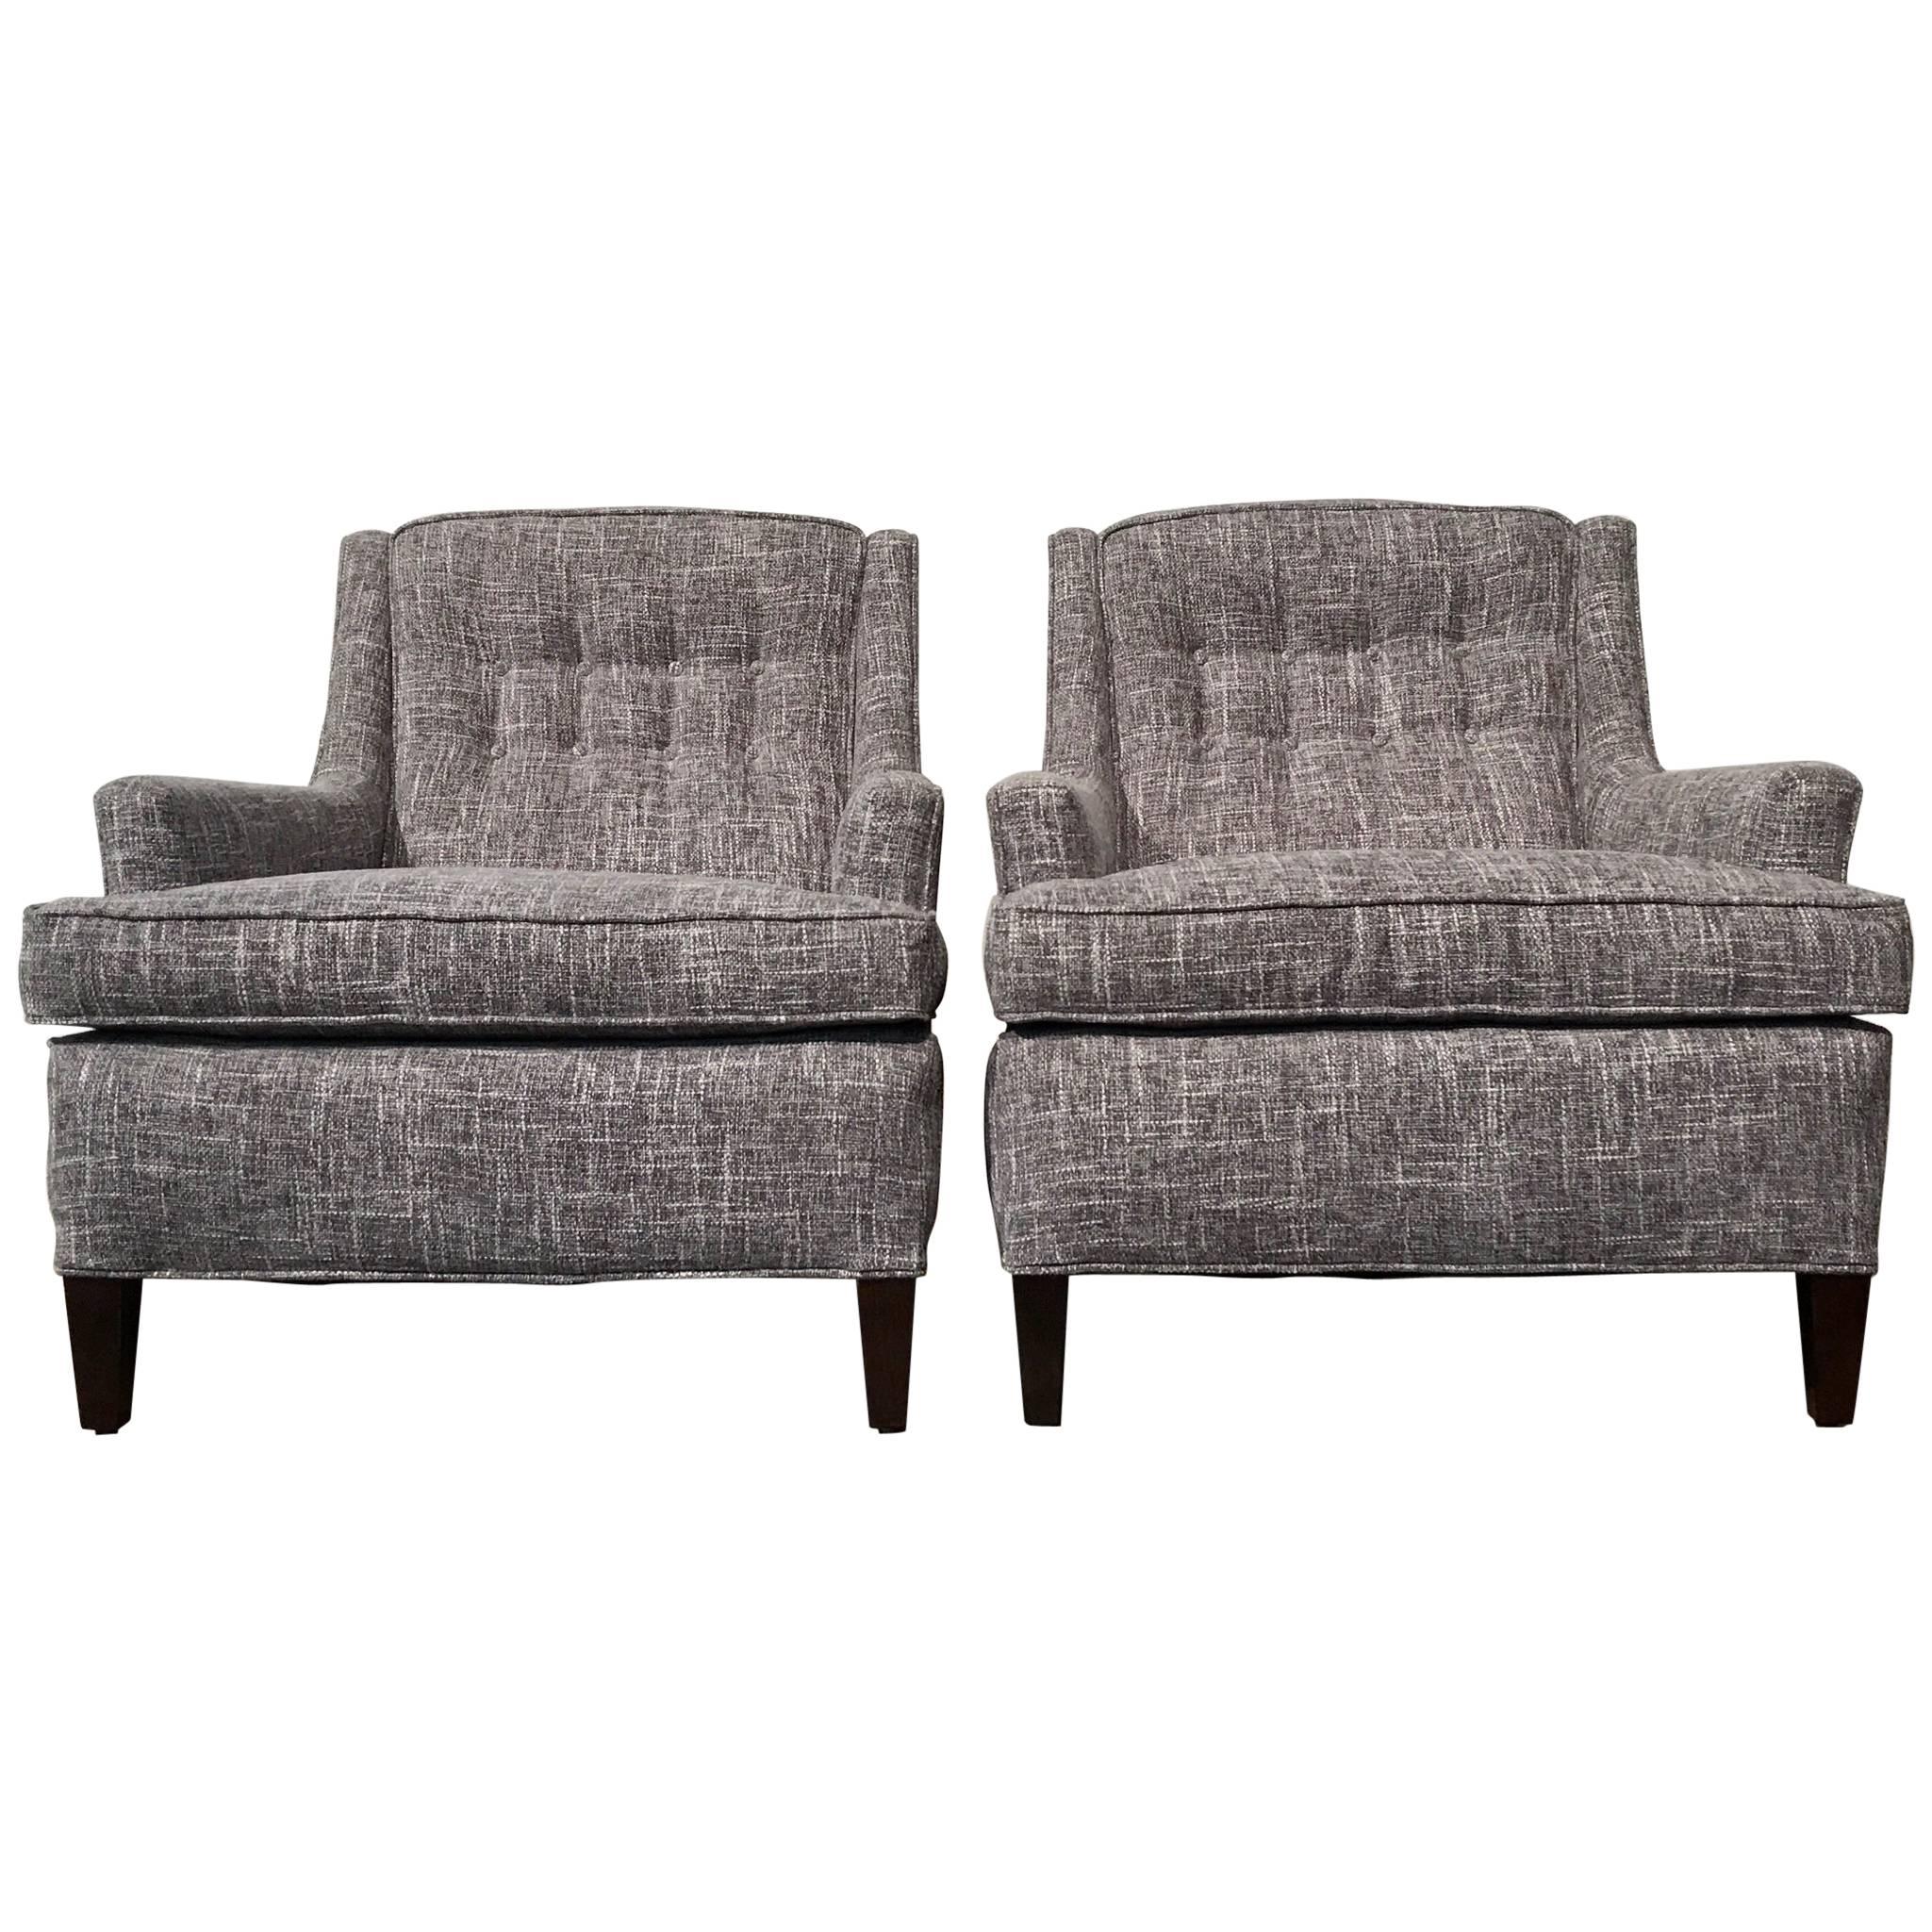 Pair of Restored Mid-Century Modern Lounge Chairs, Gray Upholstery